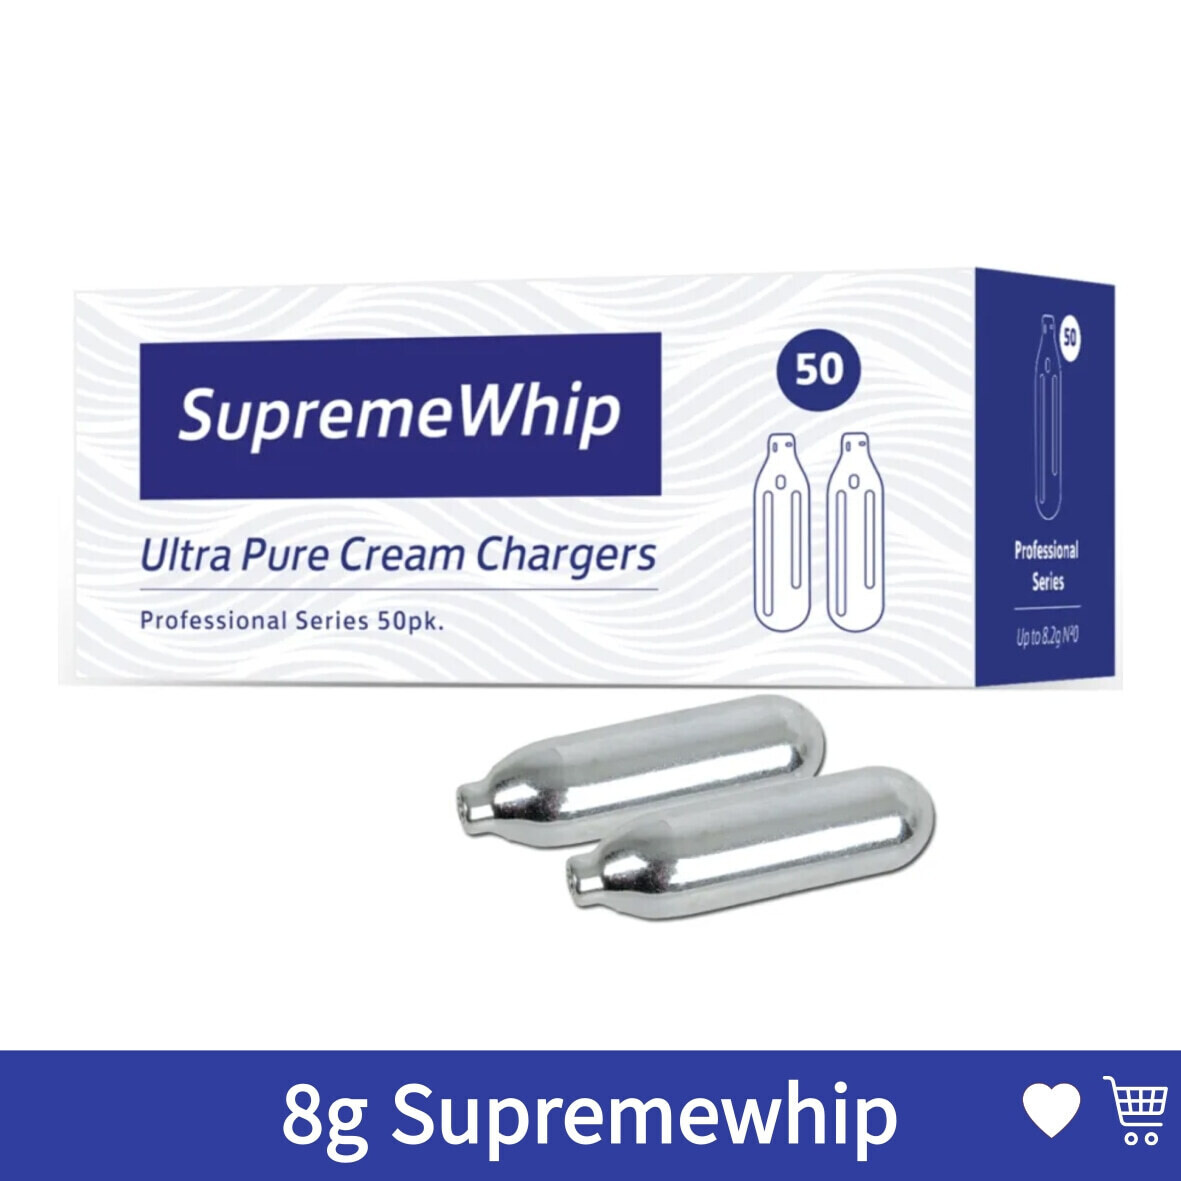 Cream Chargers: 8g SupremeWhip Professional